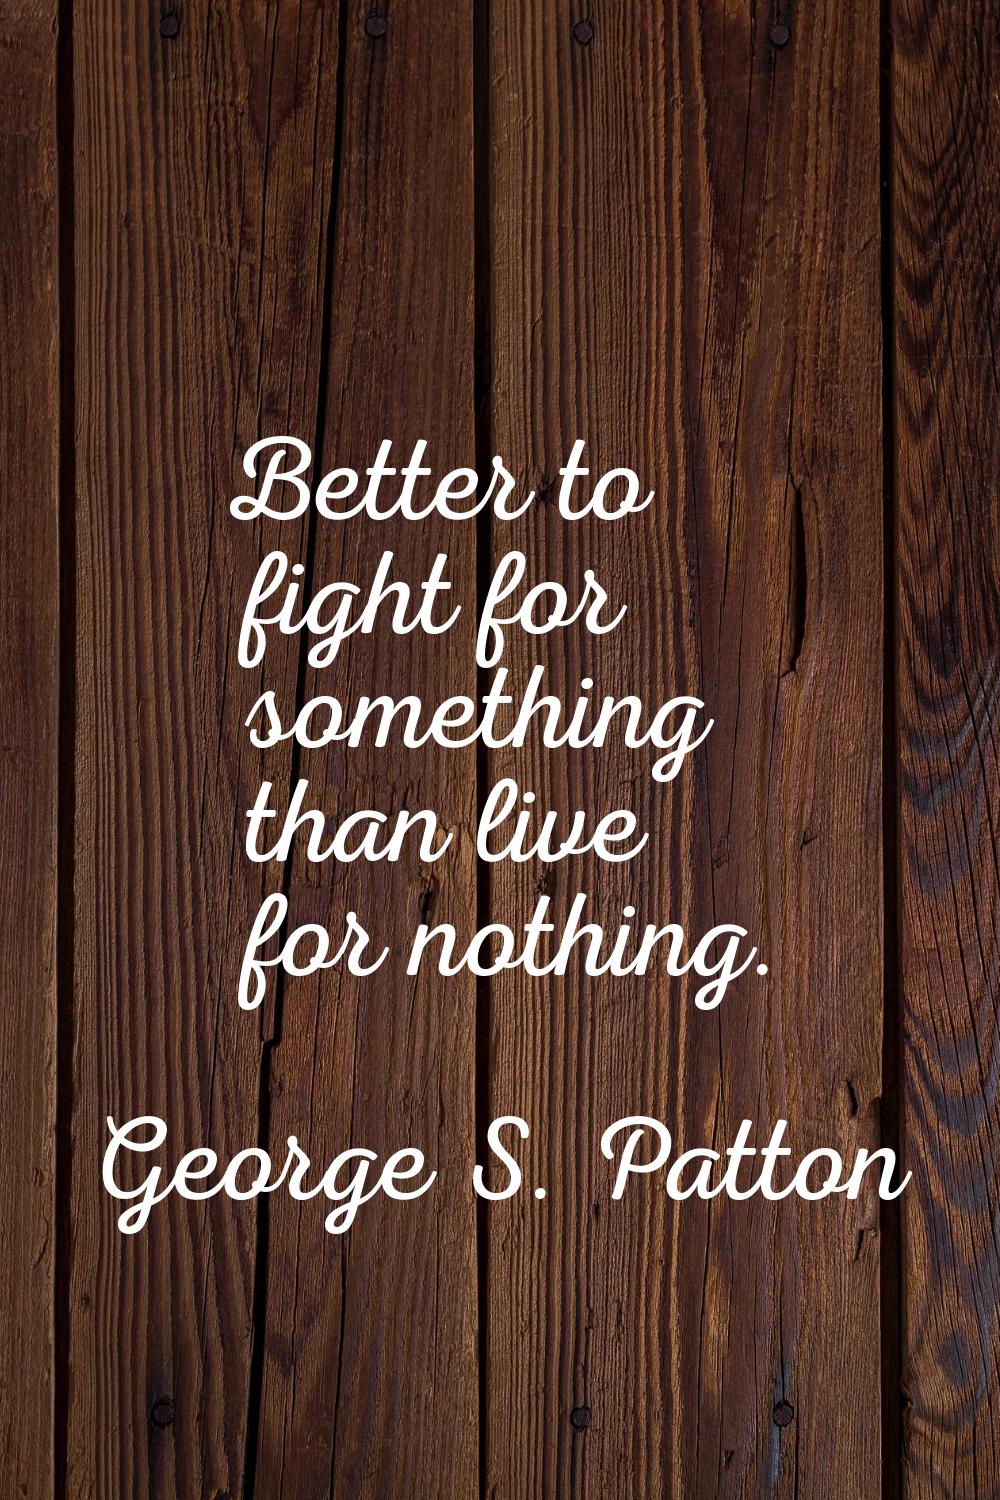 Better to fight for something than live for nothing.